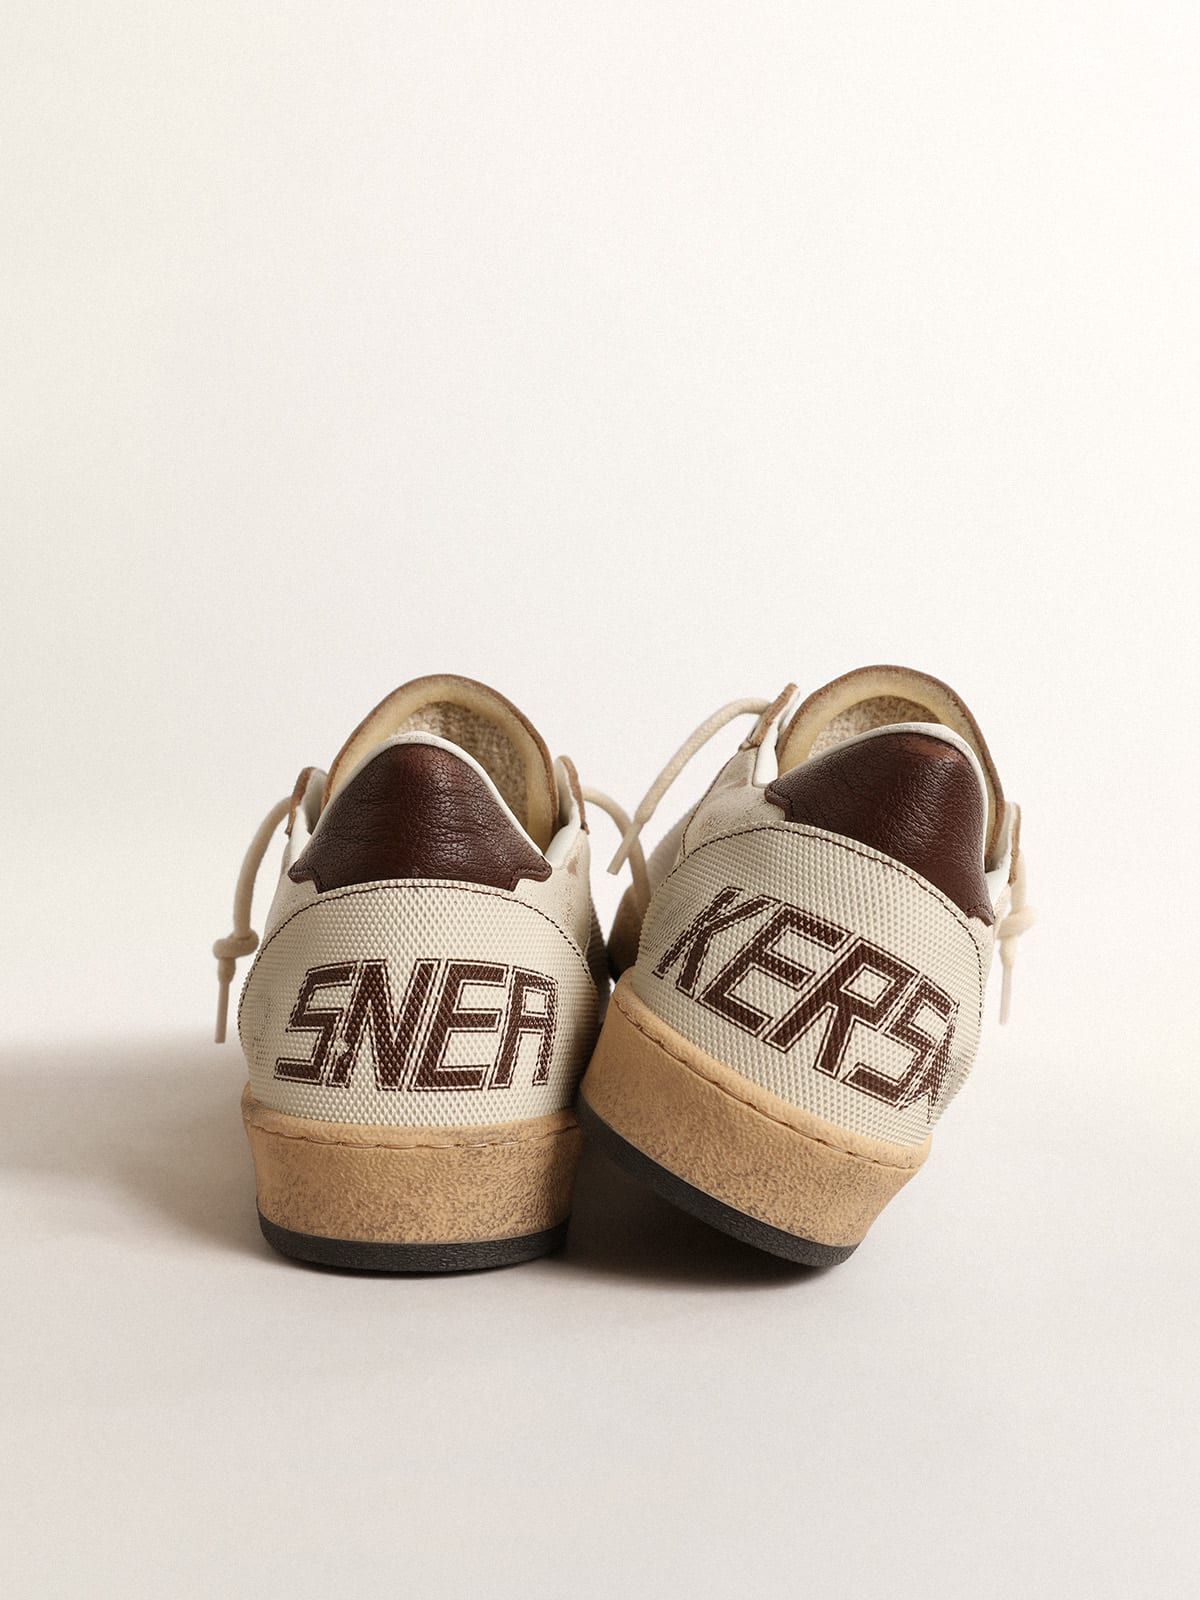 Golden Goose - Ball Star LTD in ecru leather and white mesh with brown star in 